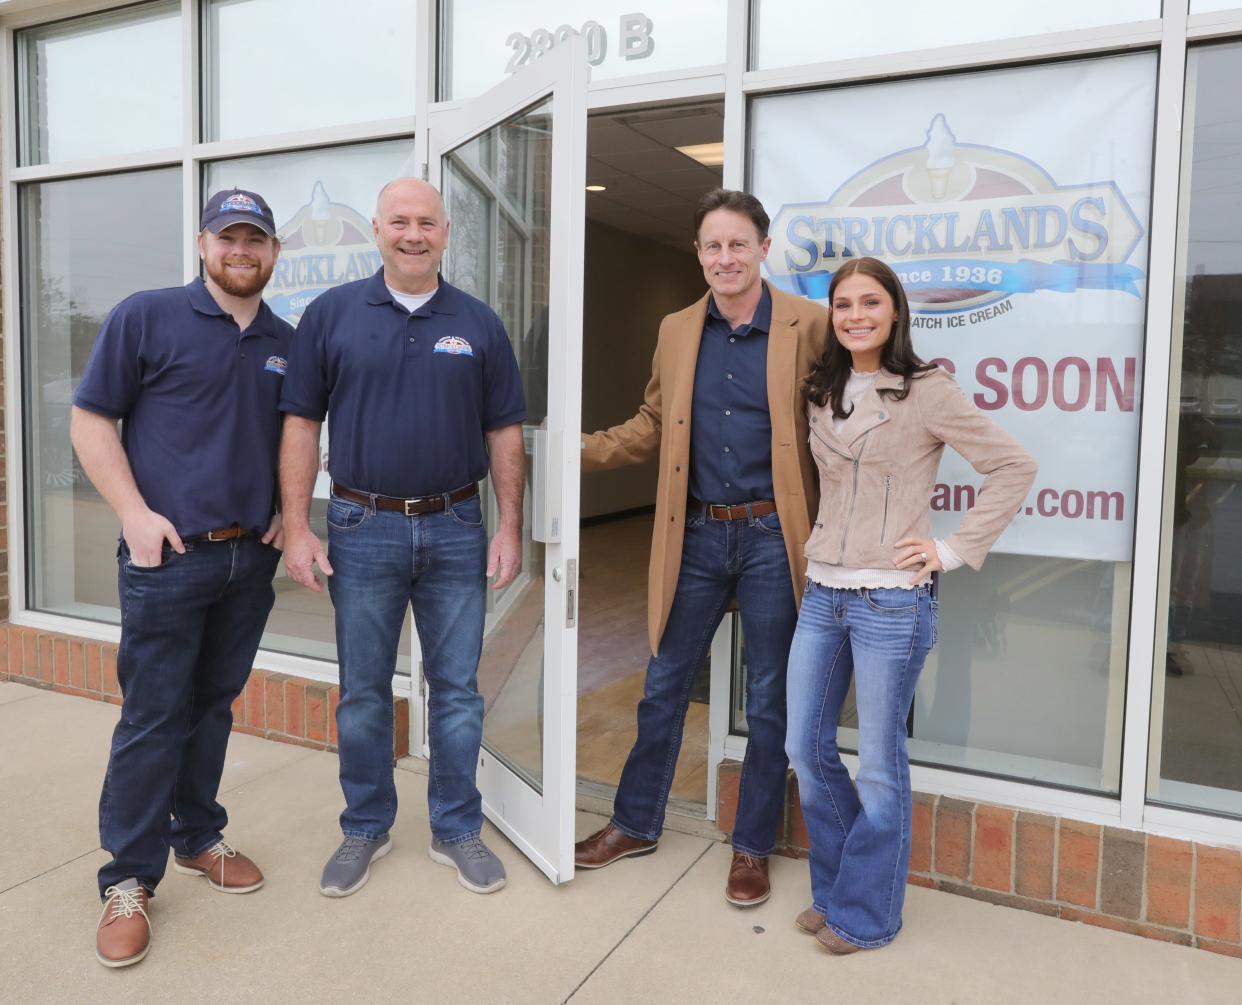 Jacob Margroff, left, and Stricklands President Scott Margroff stand with Shane and Lindsey Price outside the new Stricklands locations the Prices will open in Fairlawn in early summer.